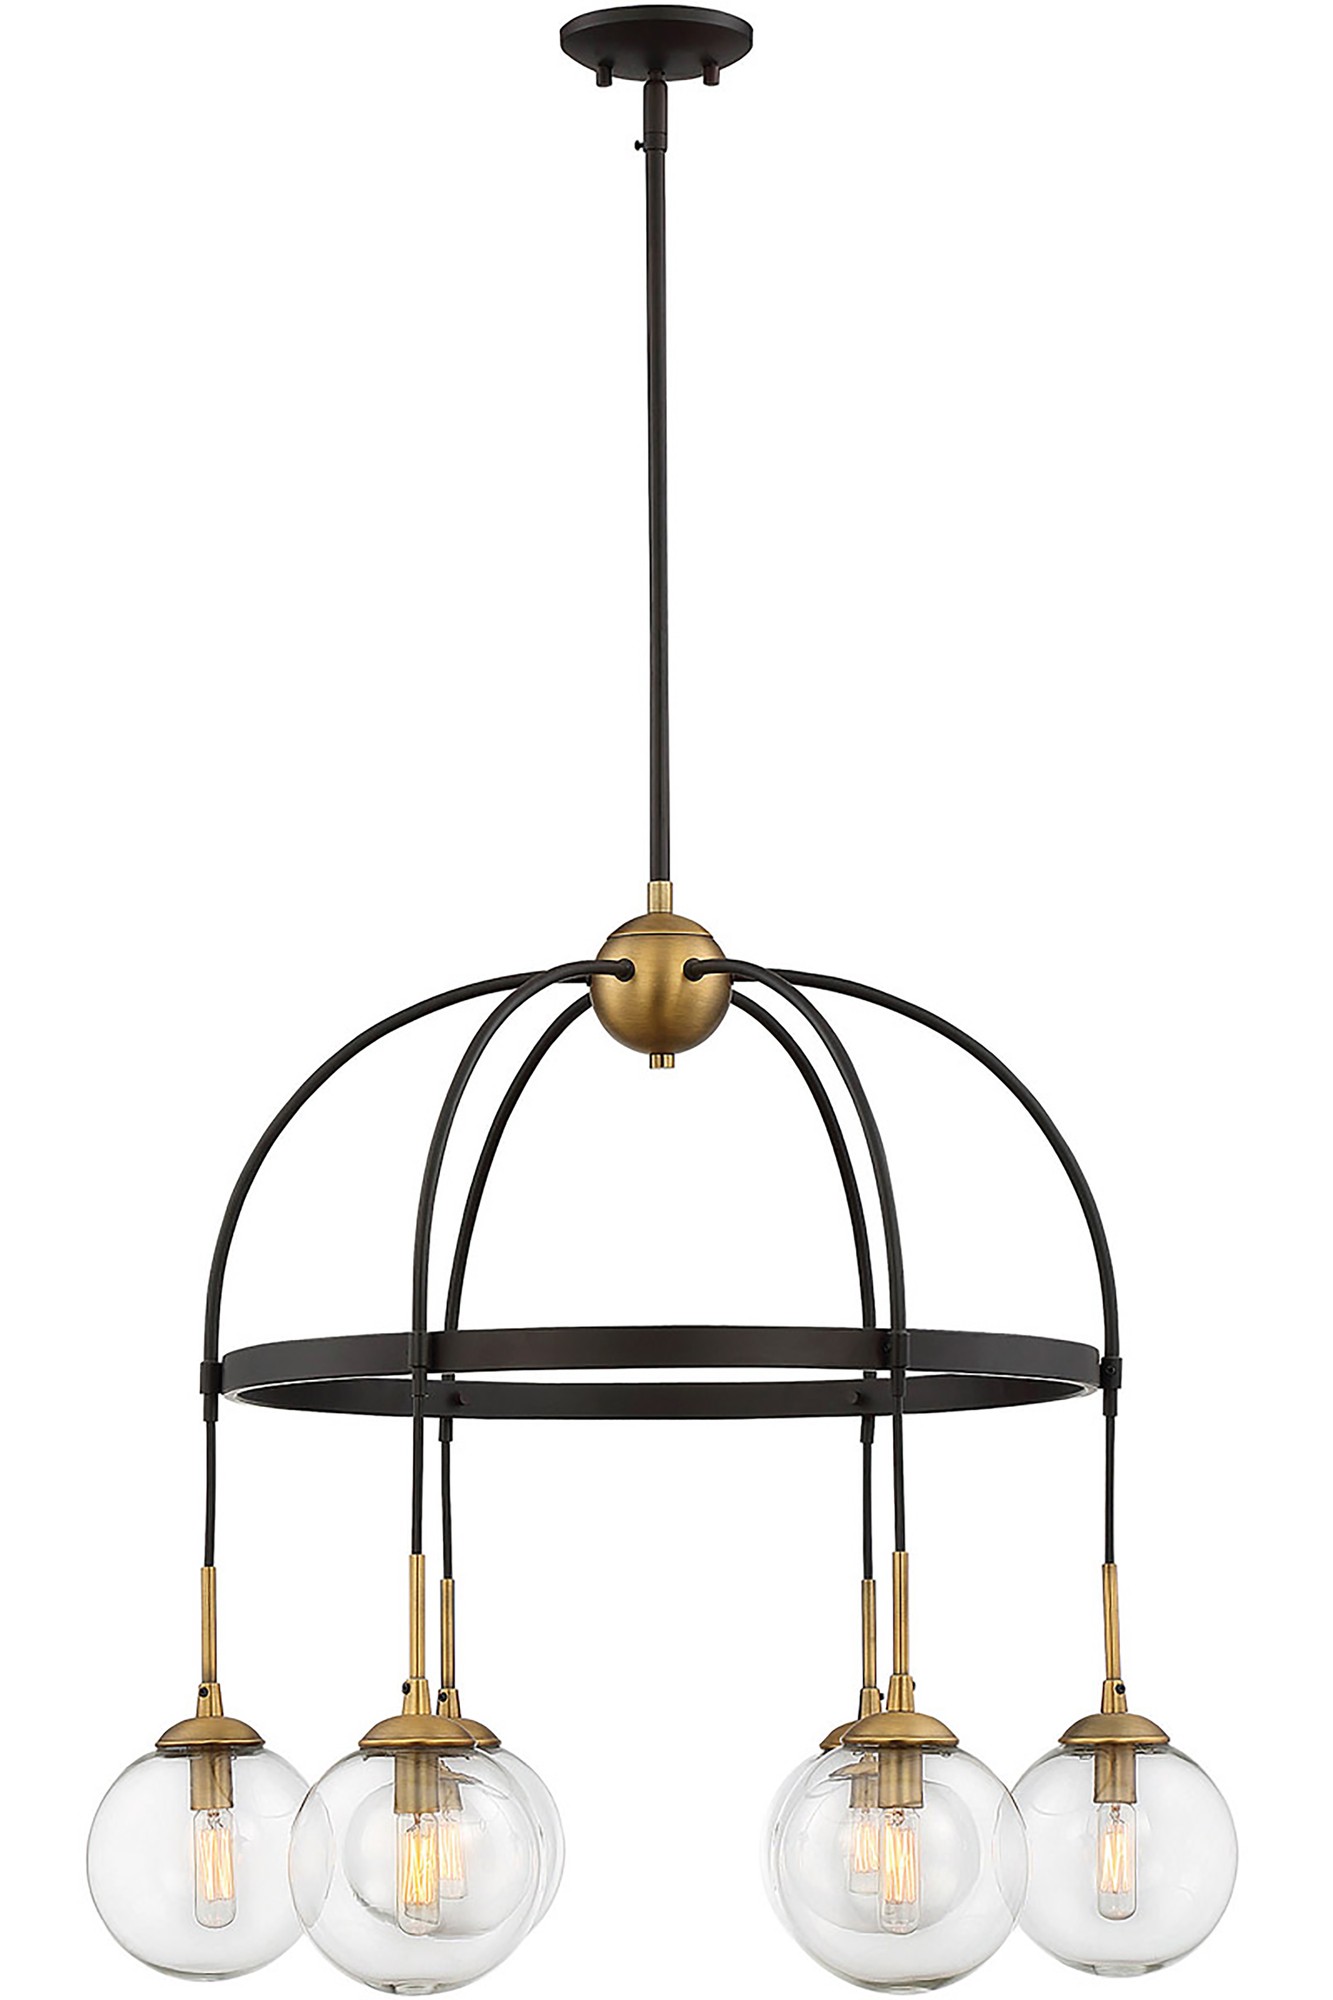 Hughes Oil Rubbed Bronze+Brass 6-Light Metal Hoop Chandelier with Clear Glass Globe Shades